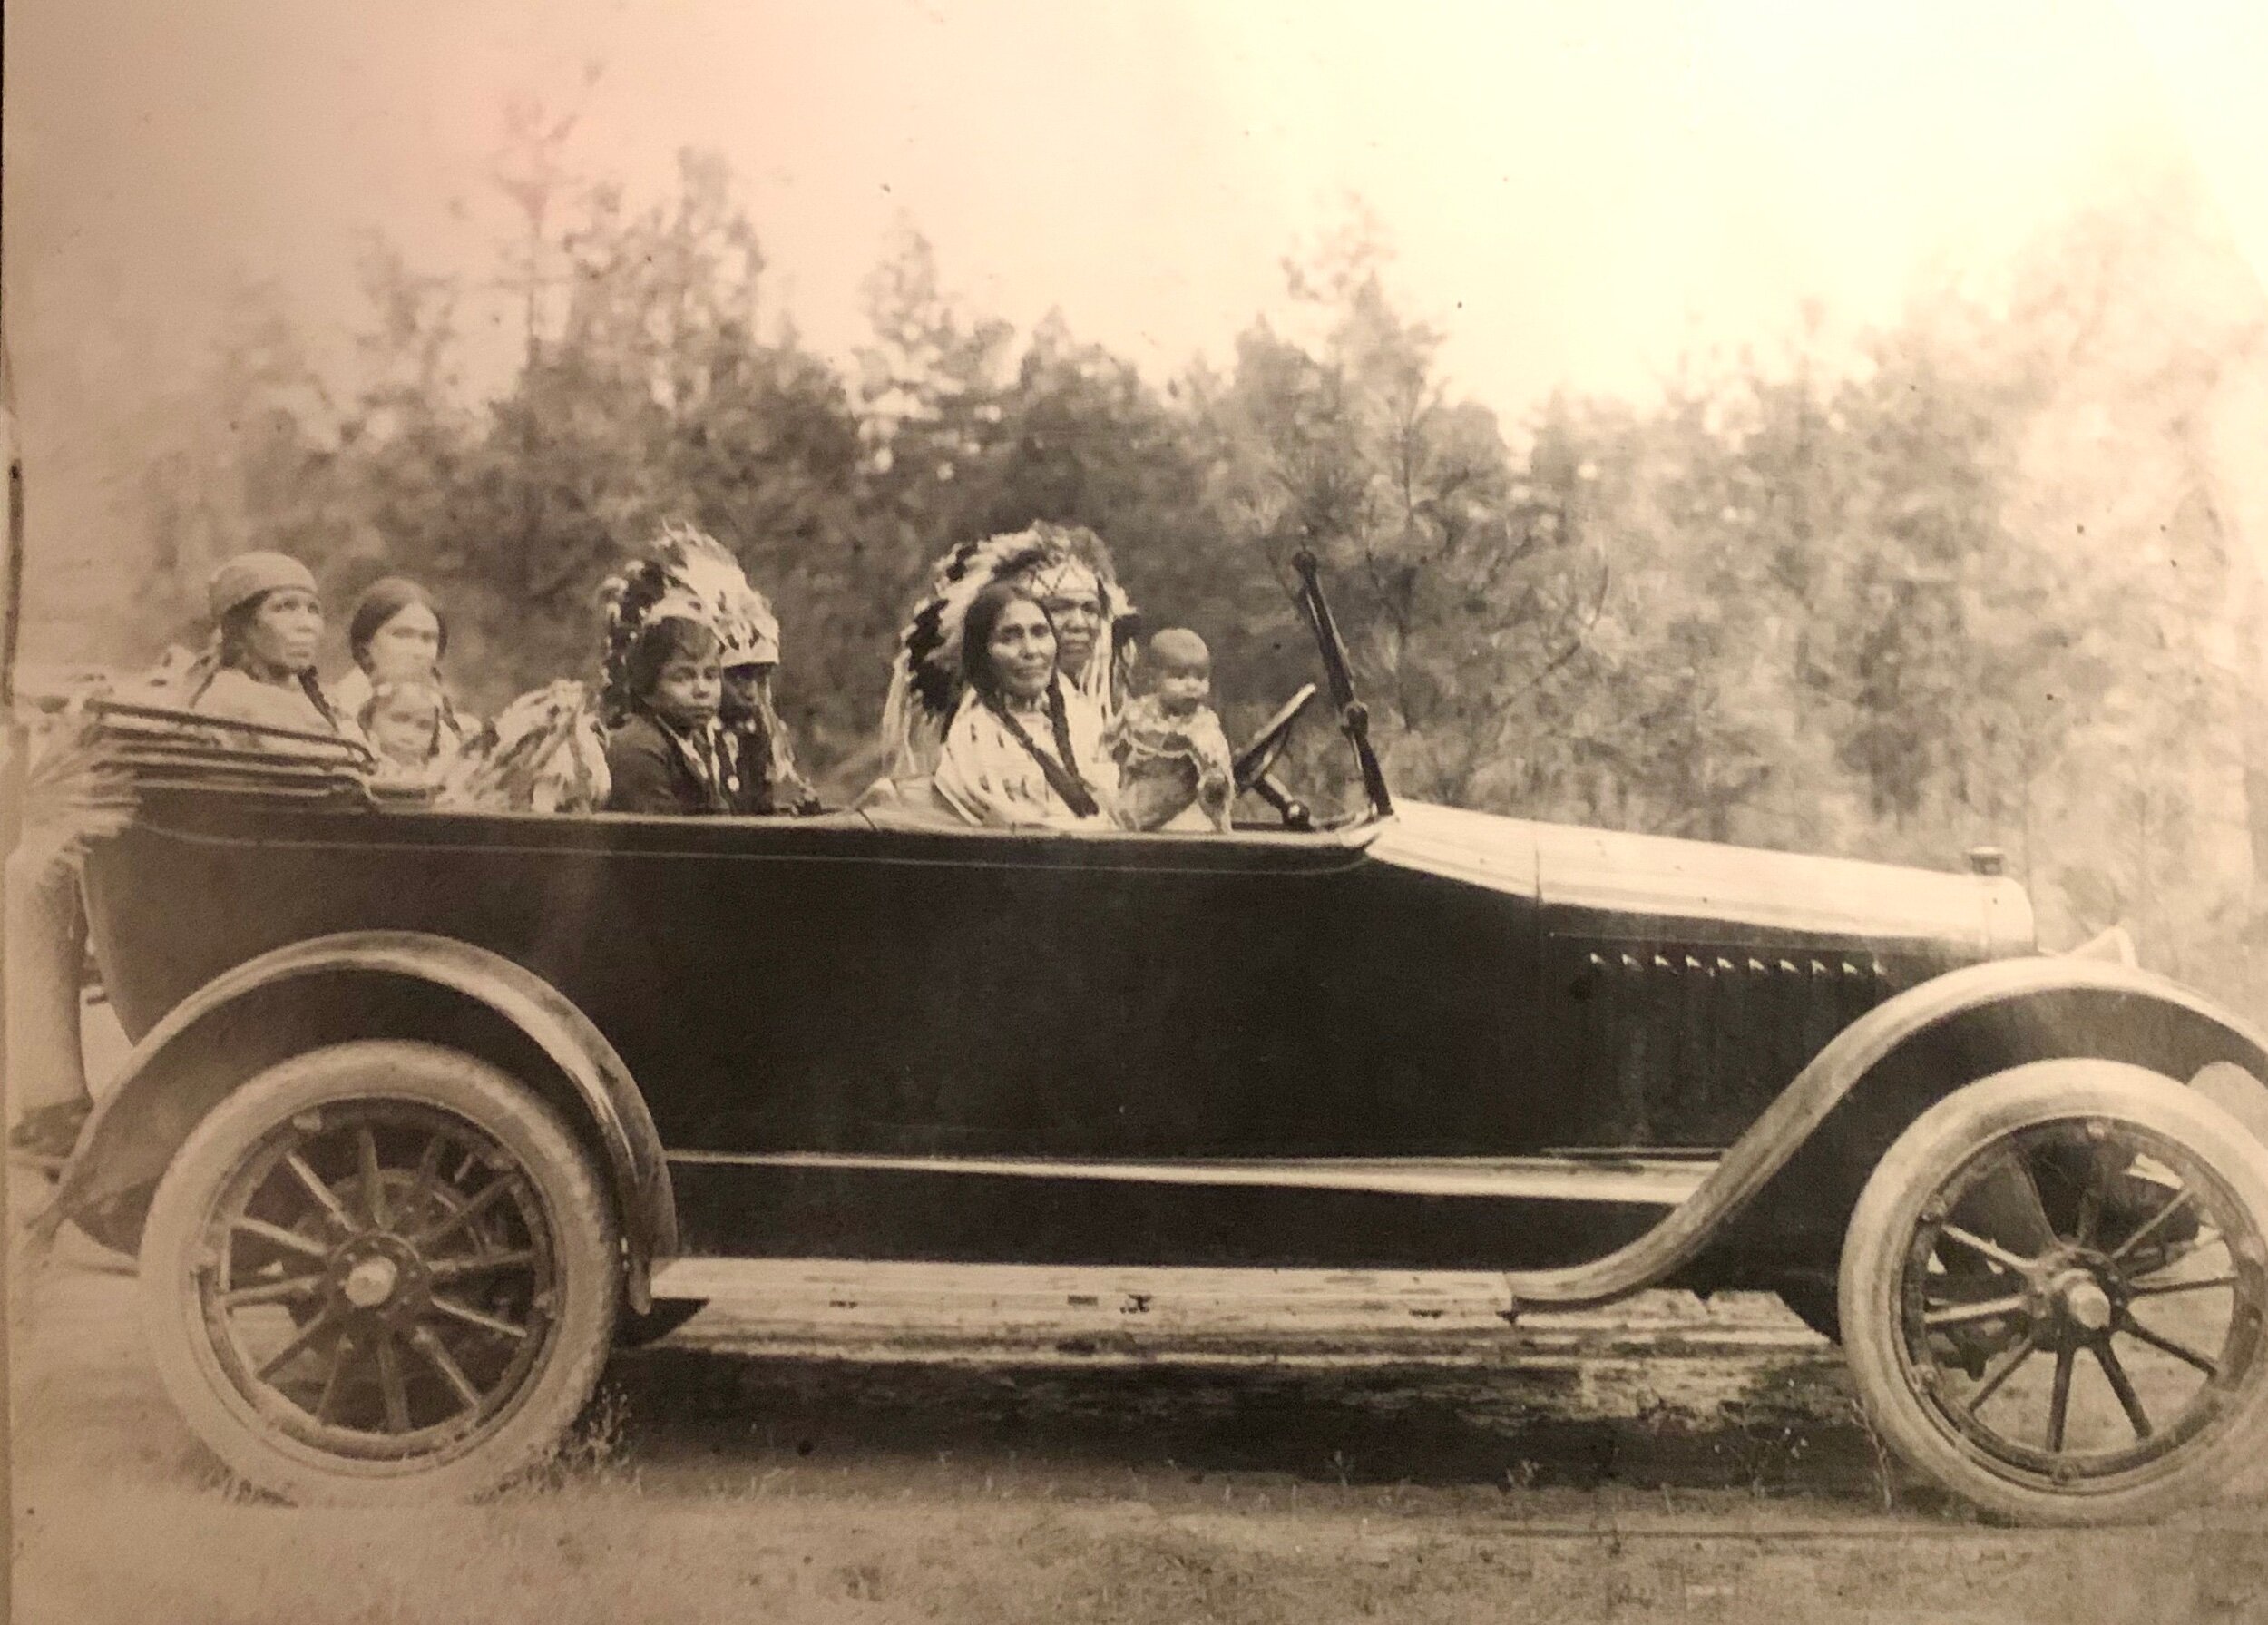  The High Desert Museum largely featured the Native Americans of this area.  I found this photo and caption especially interesting, perhaps because I never saw an Indian Chief driving an automobile.  Early twentieth-century photographers often placed